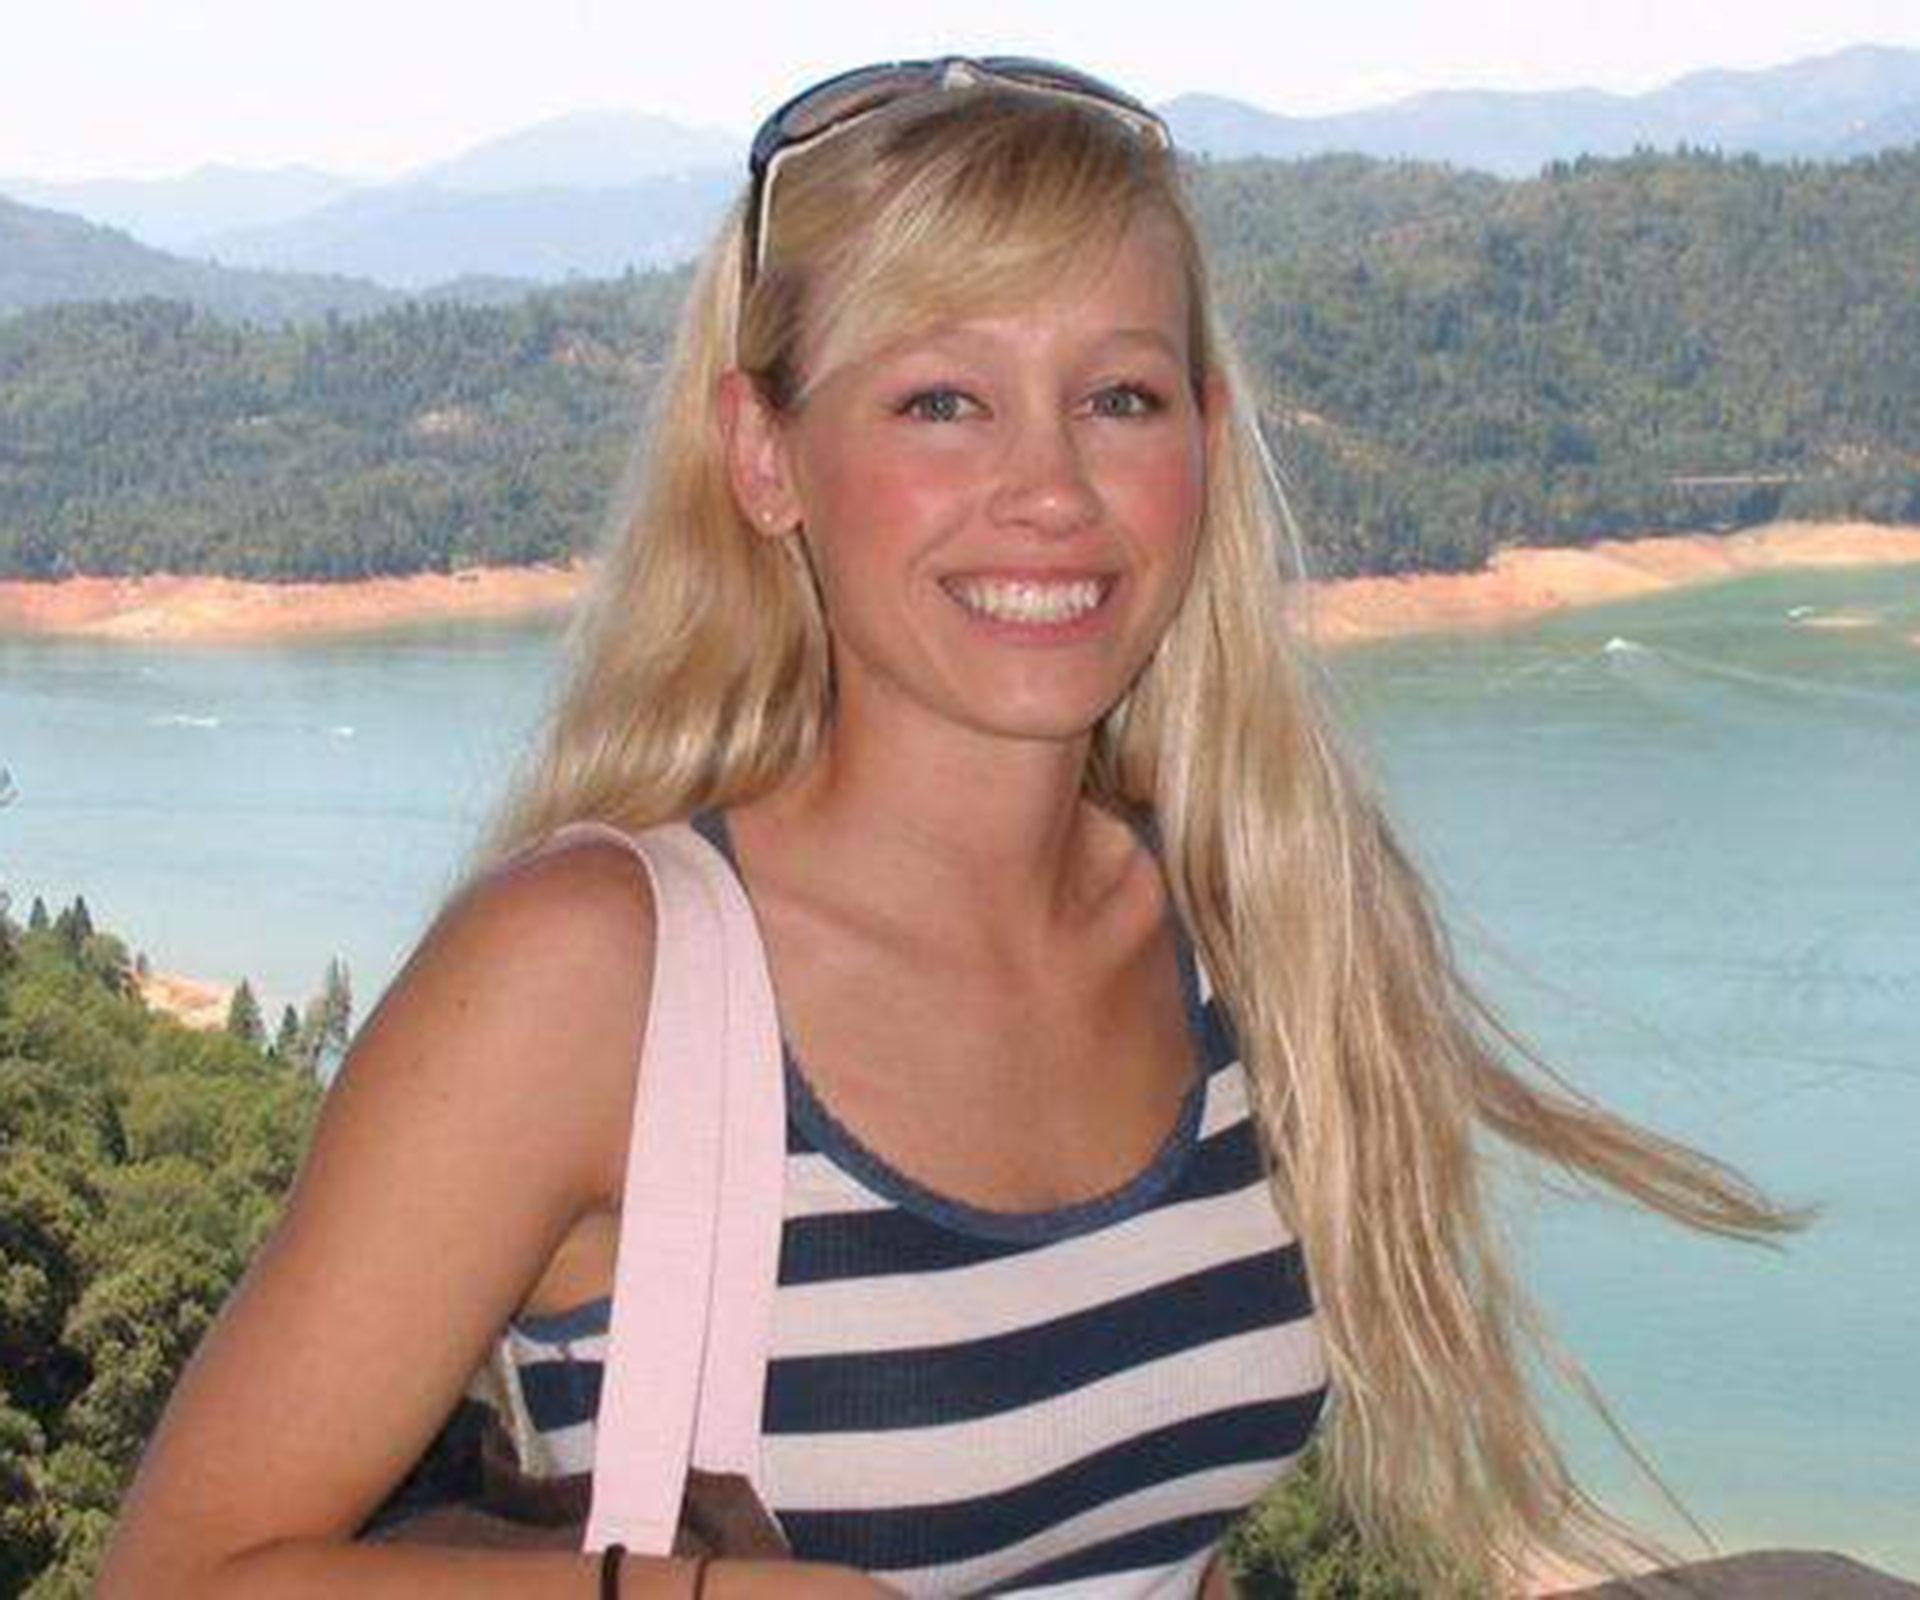 Missing mum found alive three weeks after she vanished